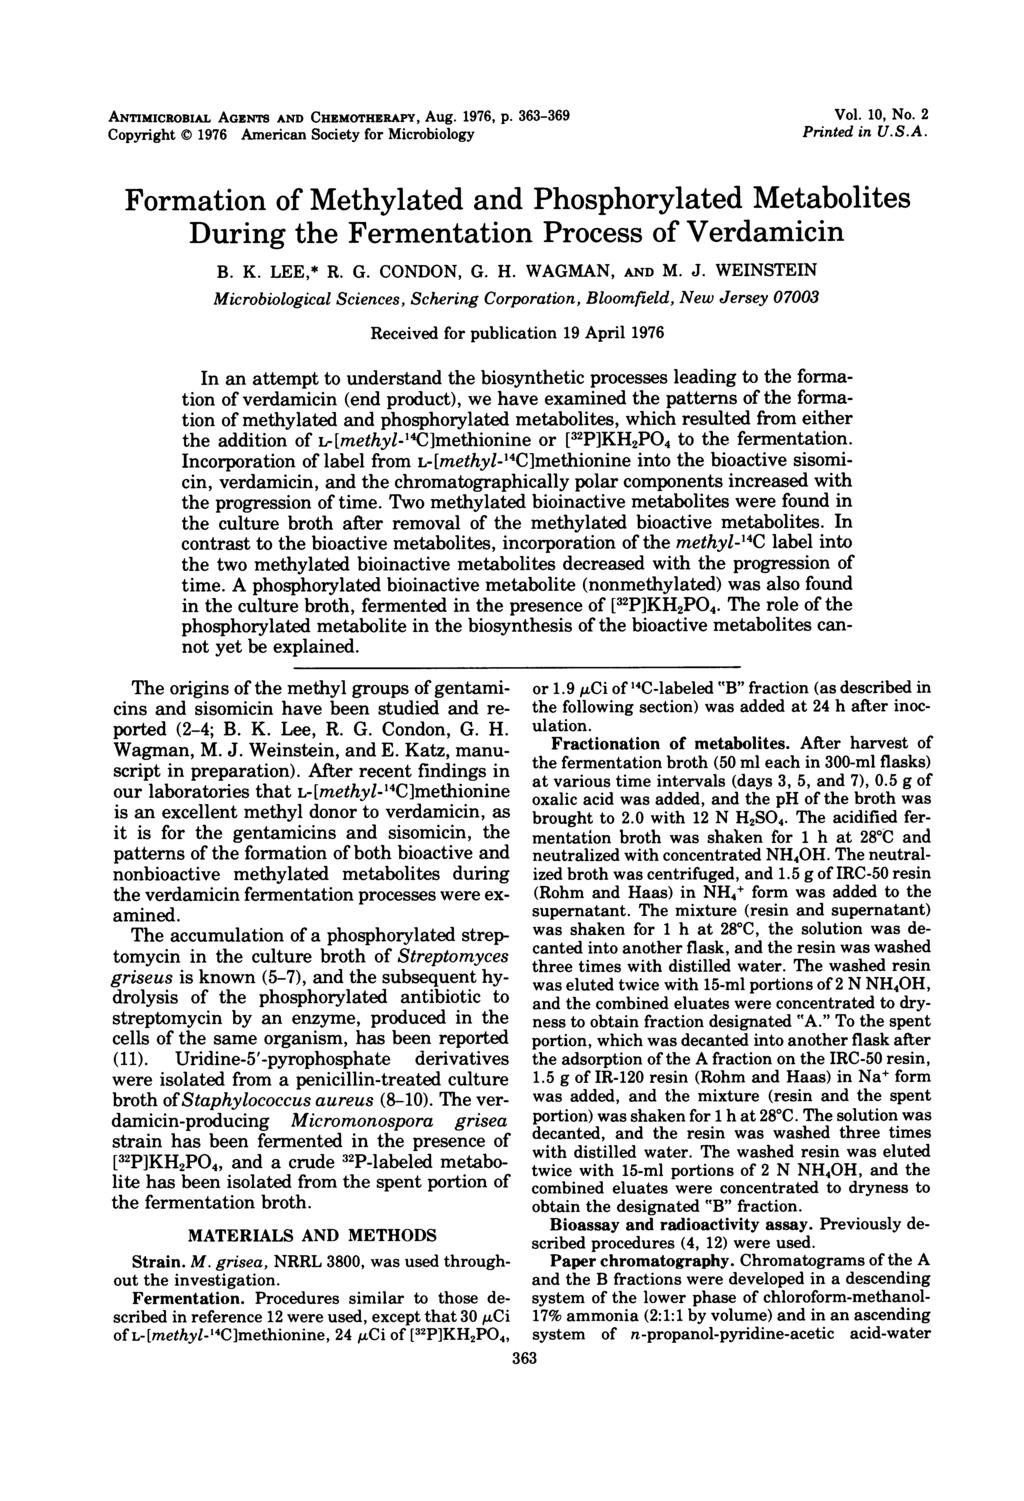 ANTMCROBAL AGENTS AND CHEMOTHERAPY, Aug. 1976, p. 363-369 Copyright 1976 American Society for Microbiology Vol. 10, No. 2 Printed in U.S.A. Formation of Methylated and Phosphorylated Metabolites During the Fermentation Process of Verdamicin B.